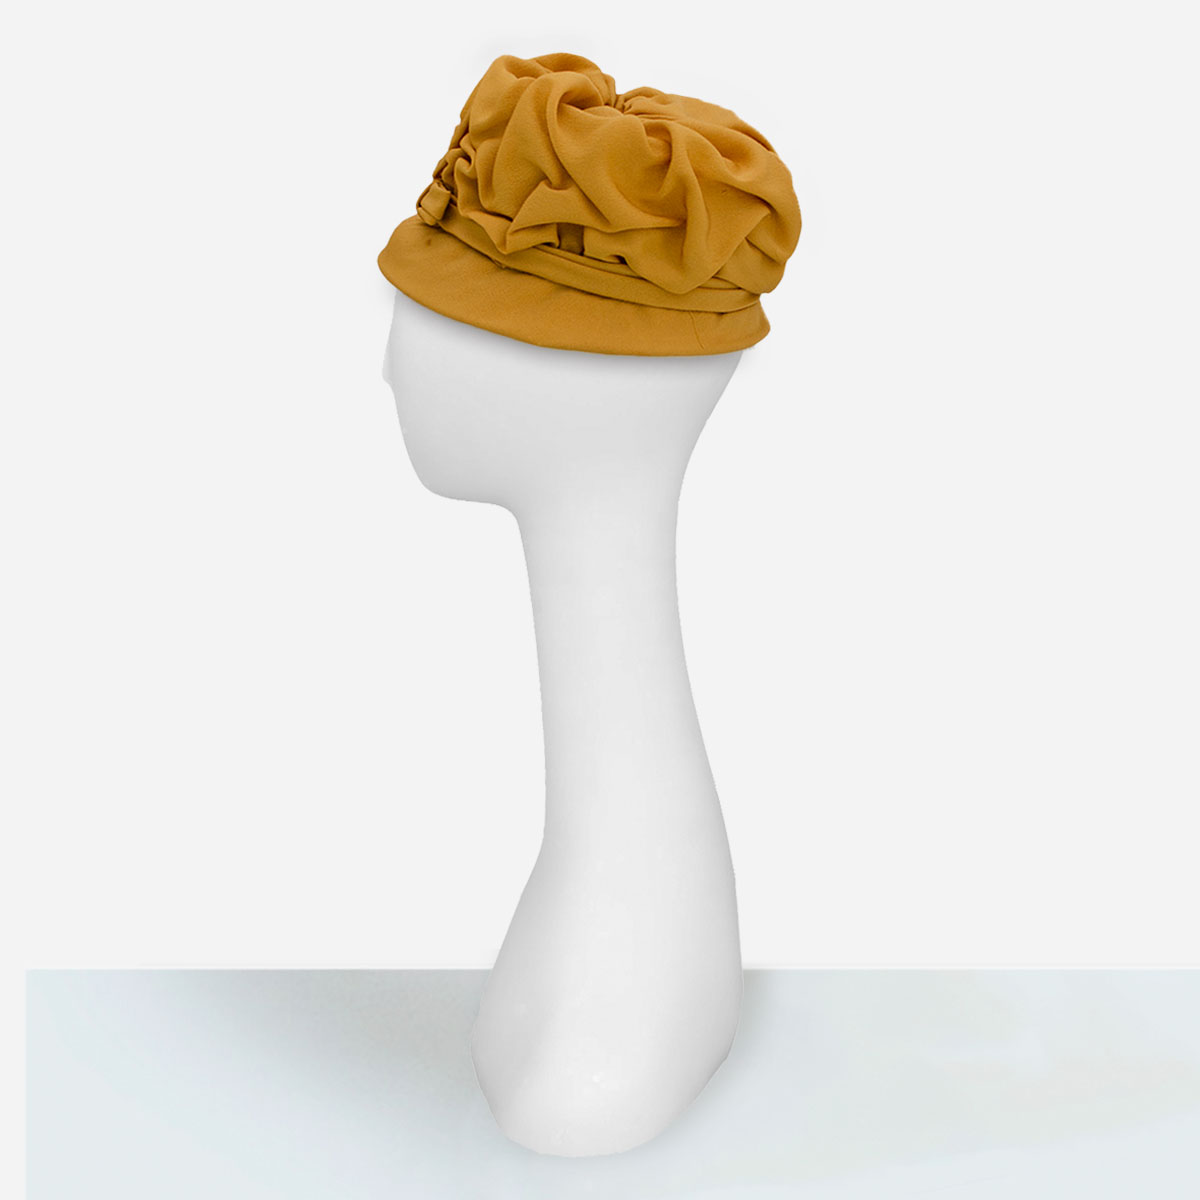 1950s gold turban, pleated hat